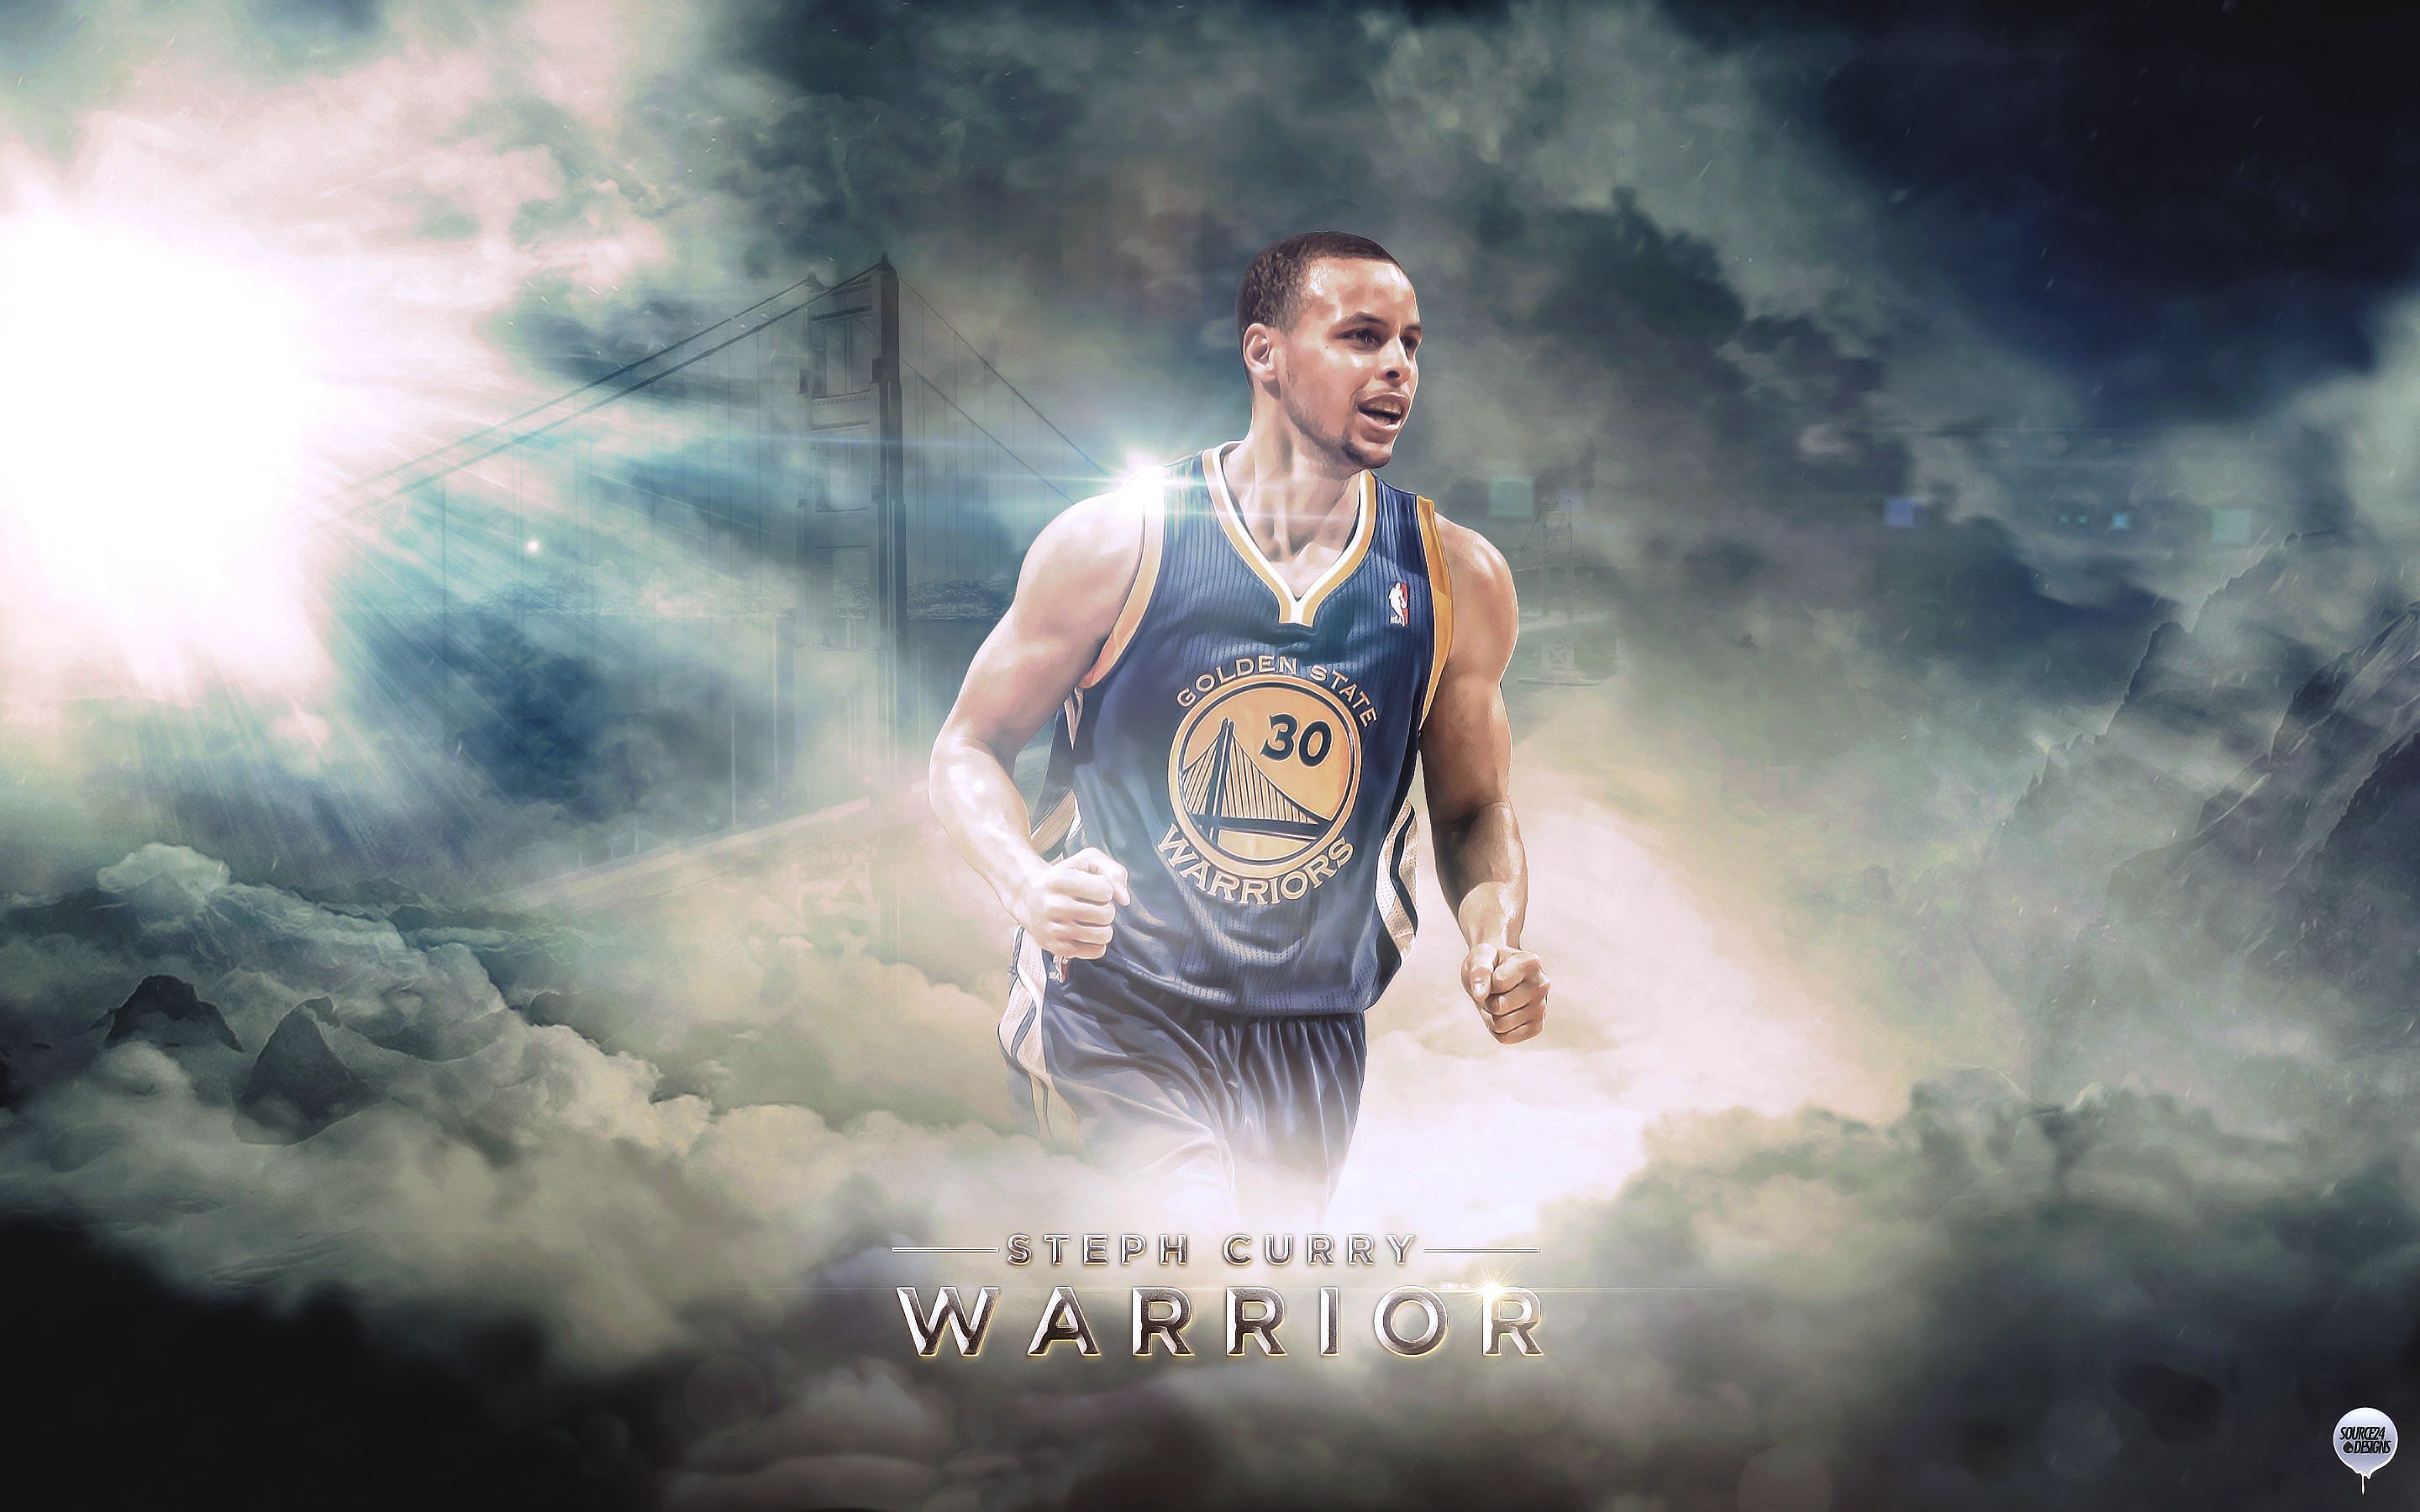 Stephen Curry Wallpaper Free Download. Wallpaper, Background, Image, Art Photo. Stephen curry basketball, Stephen curry, Stephen curry wallpaper